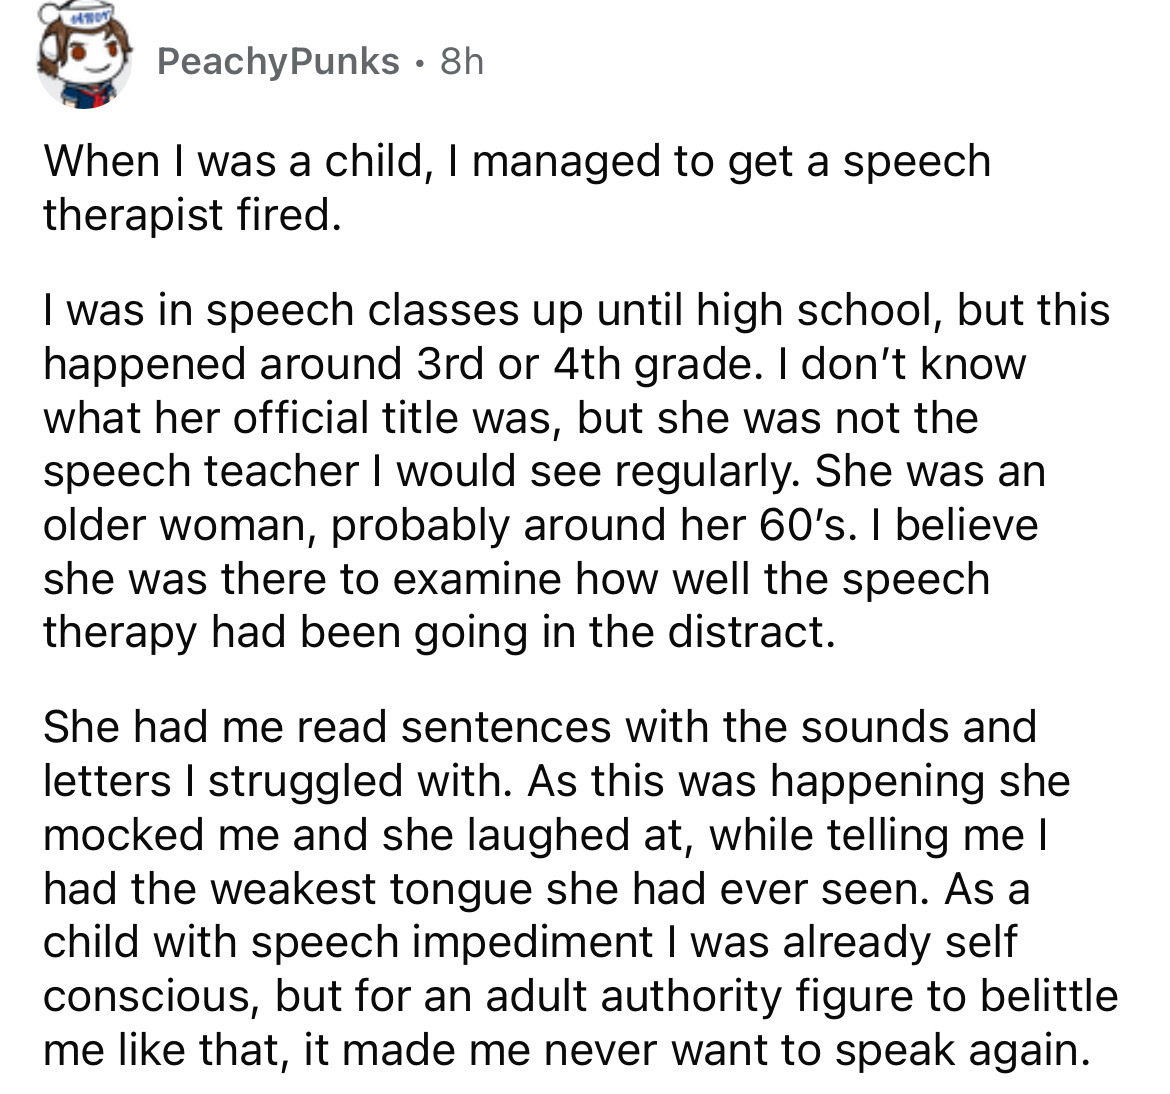 angle - Peachy Punks 8h When I was a child, I managed to get a speech therapist fired. I was in speech classes up until high school, but this happened around 3rd or 4th grade. I don't know what her official title was, but she was not the speech teacher I 